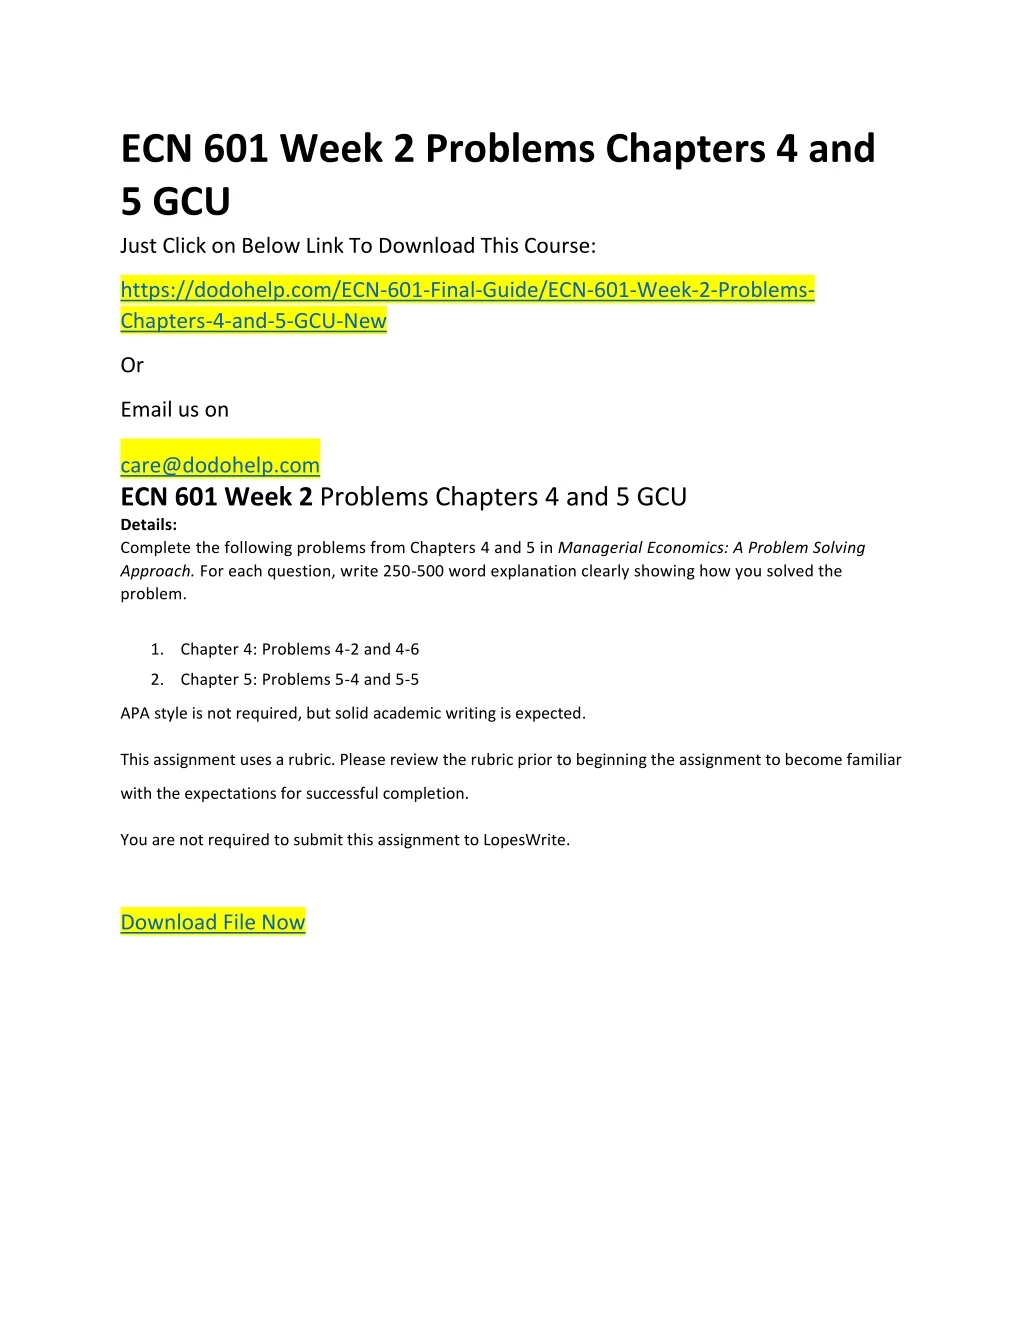 ecn 601 week 2 problems chapters 4 and 5 gcu just